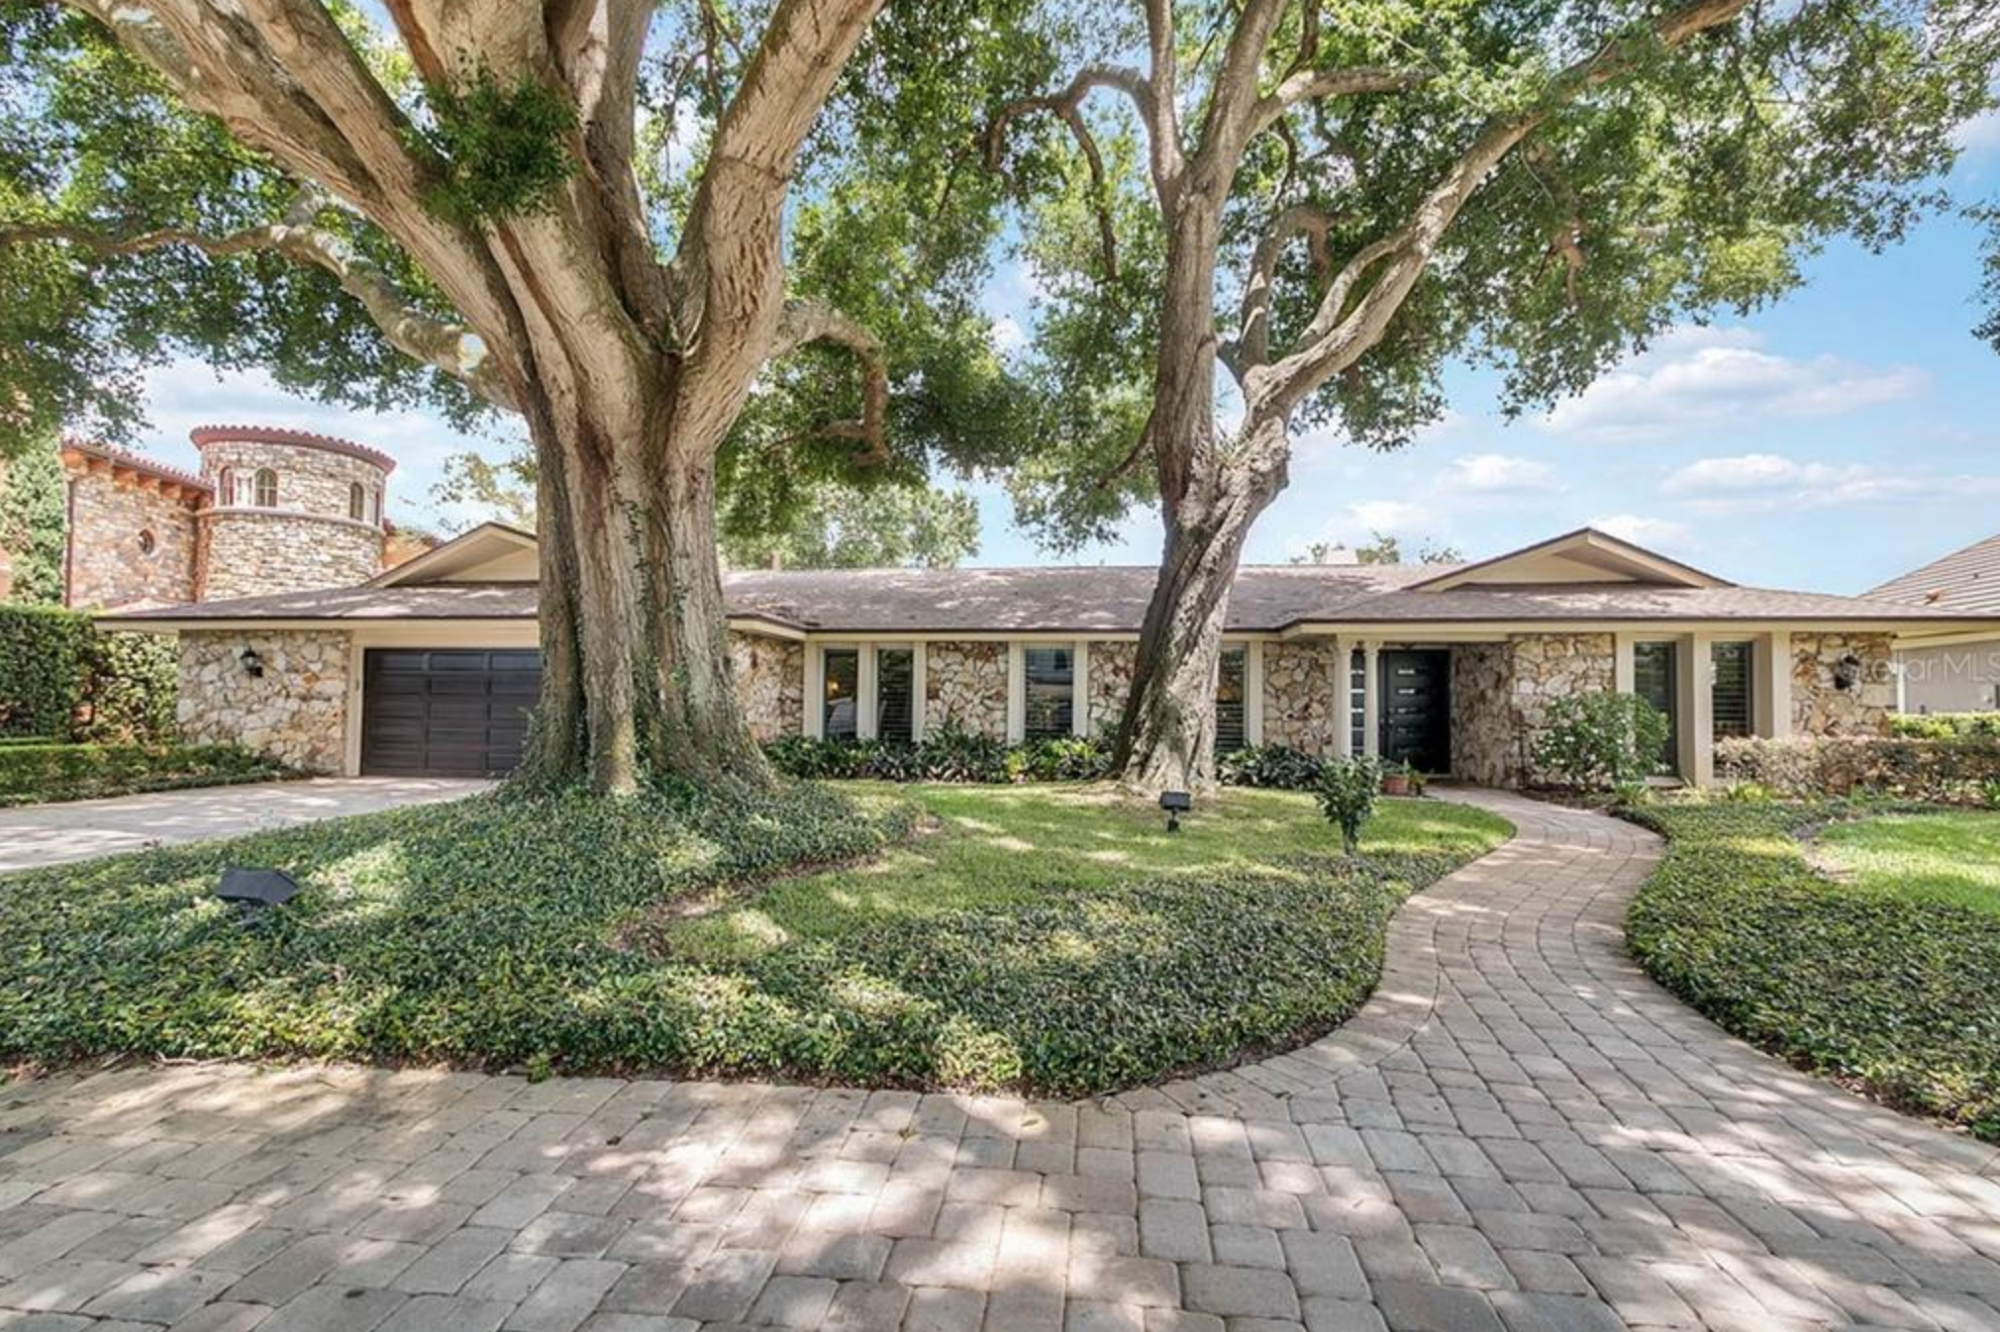 The home at 6123 Tarawood Drive, Orlando, 32819, sold Sept. 5, for $1.1 million. This home features Brazilian cherry wood flooring and an open-concept kitchen with Busby cabinets, two refrigerators and a sit-down, high-top island. movoto.com.